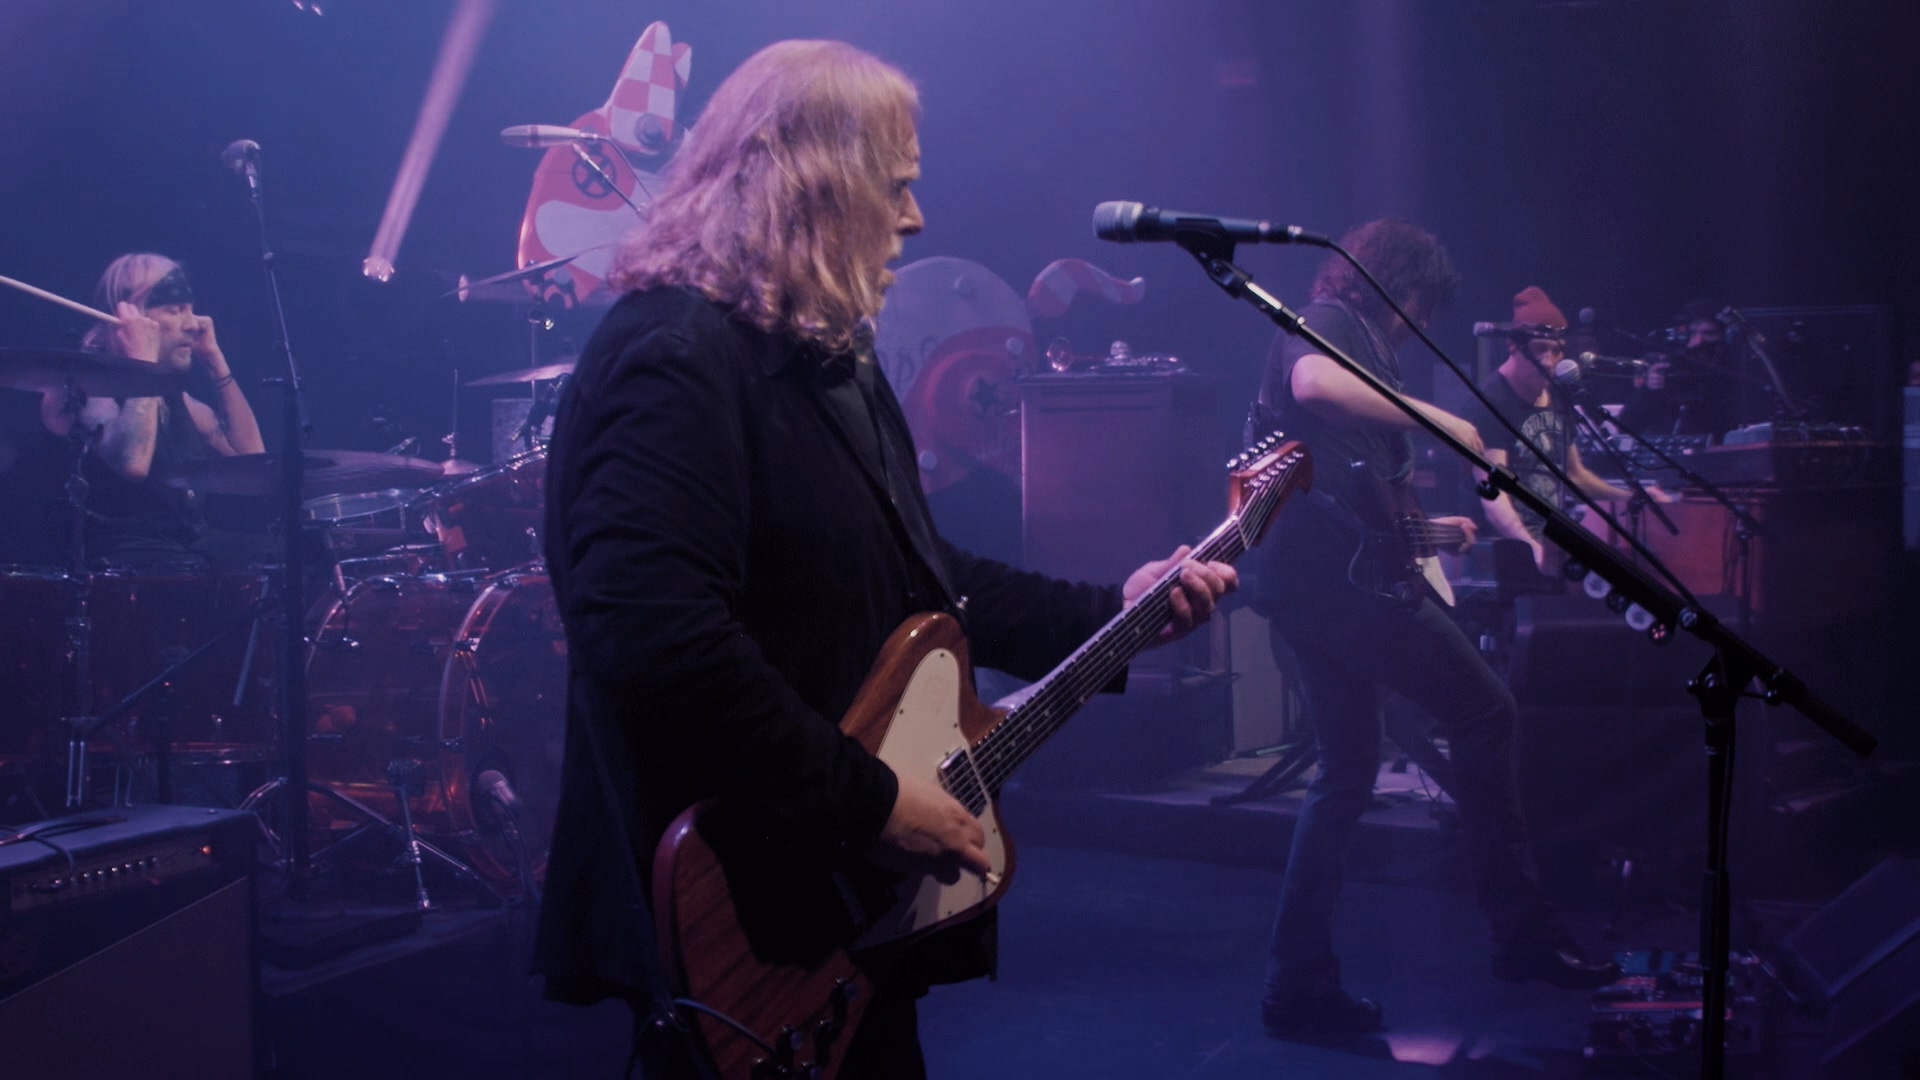 Gov't Mule - Bring On The Music Live At The Capitol Theatre 2018 Bluray 1080p AVC DTS-HD MA 5.1_20190727_125703.482.jpg